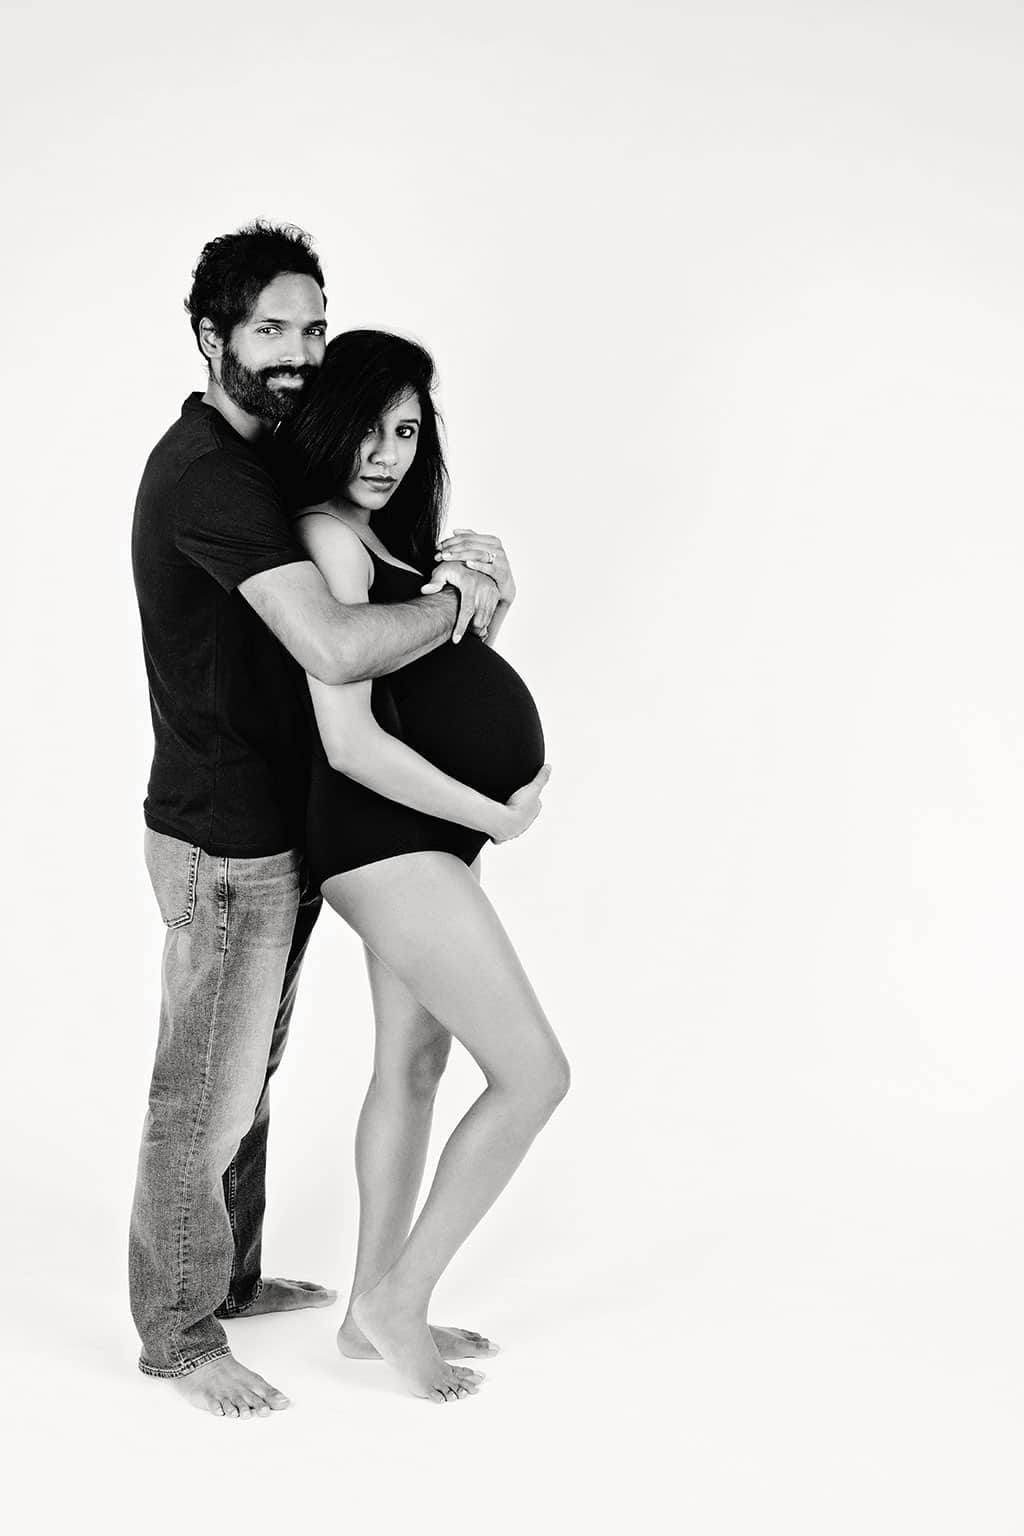 Studio maternity session filled with variety of looks